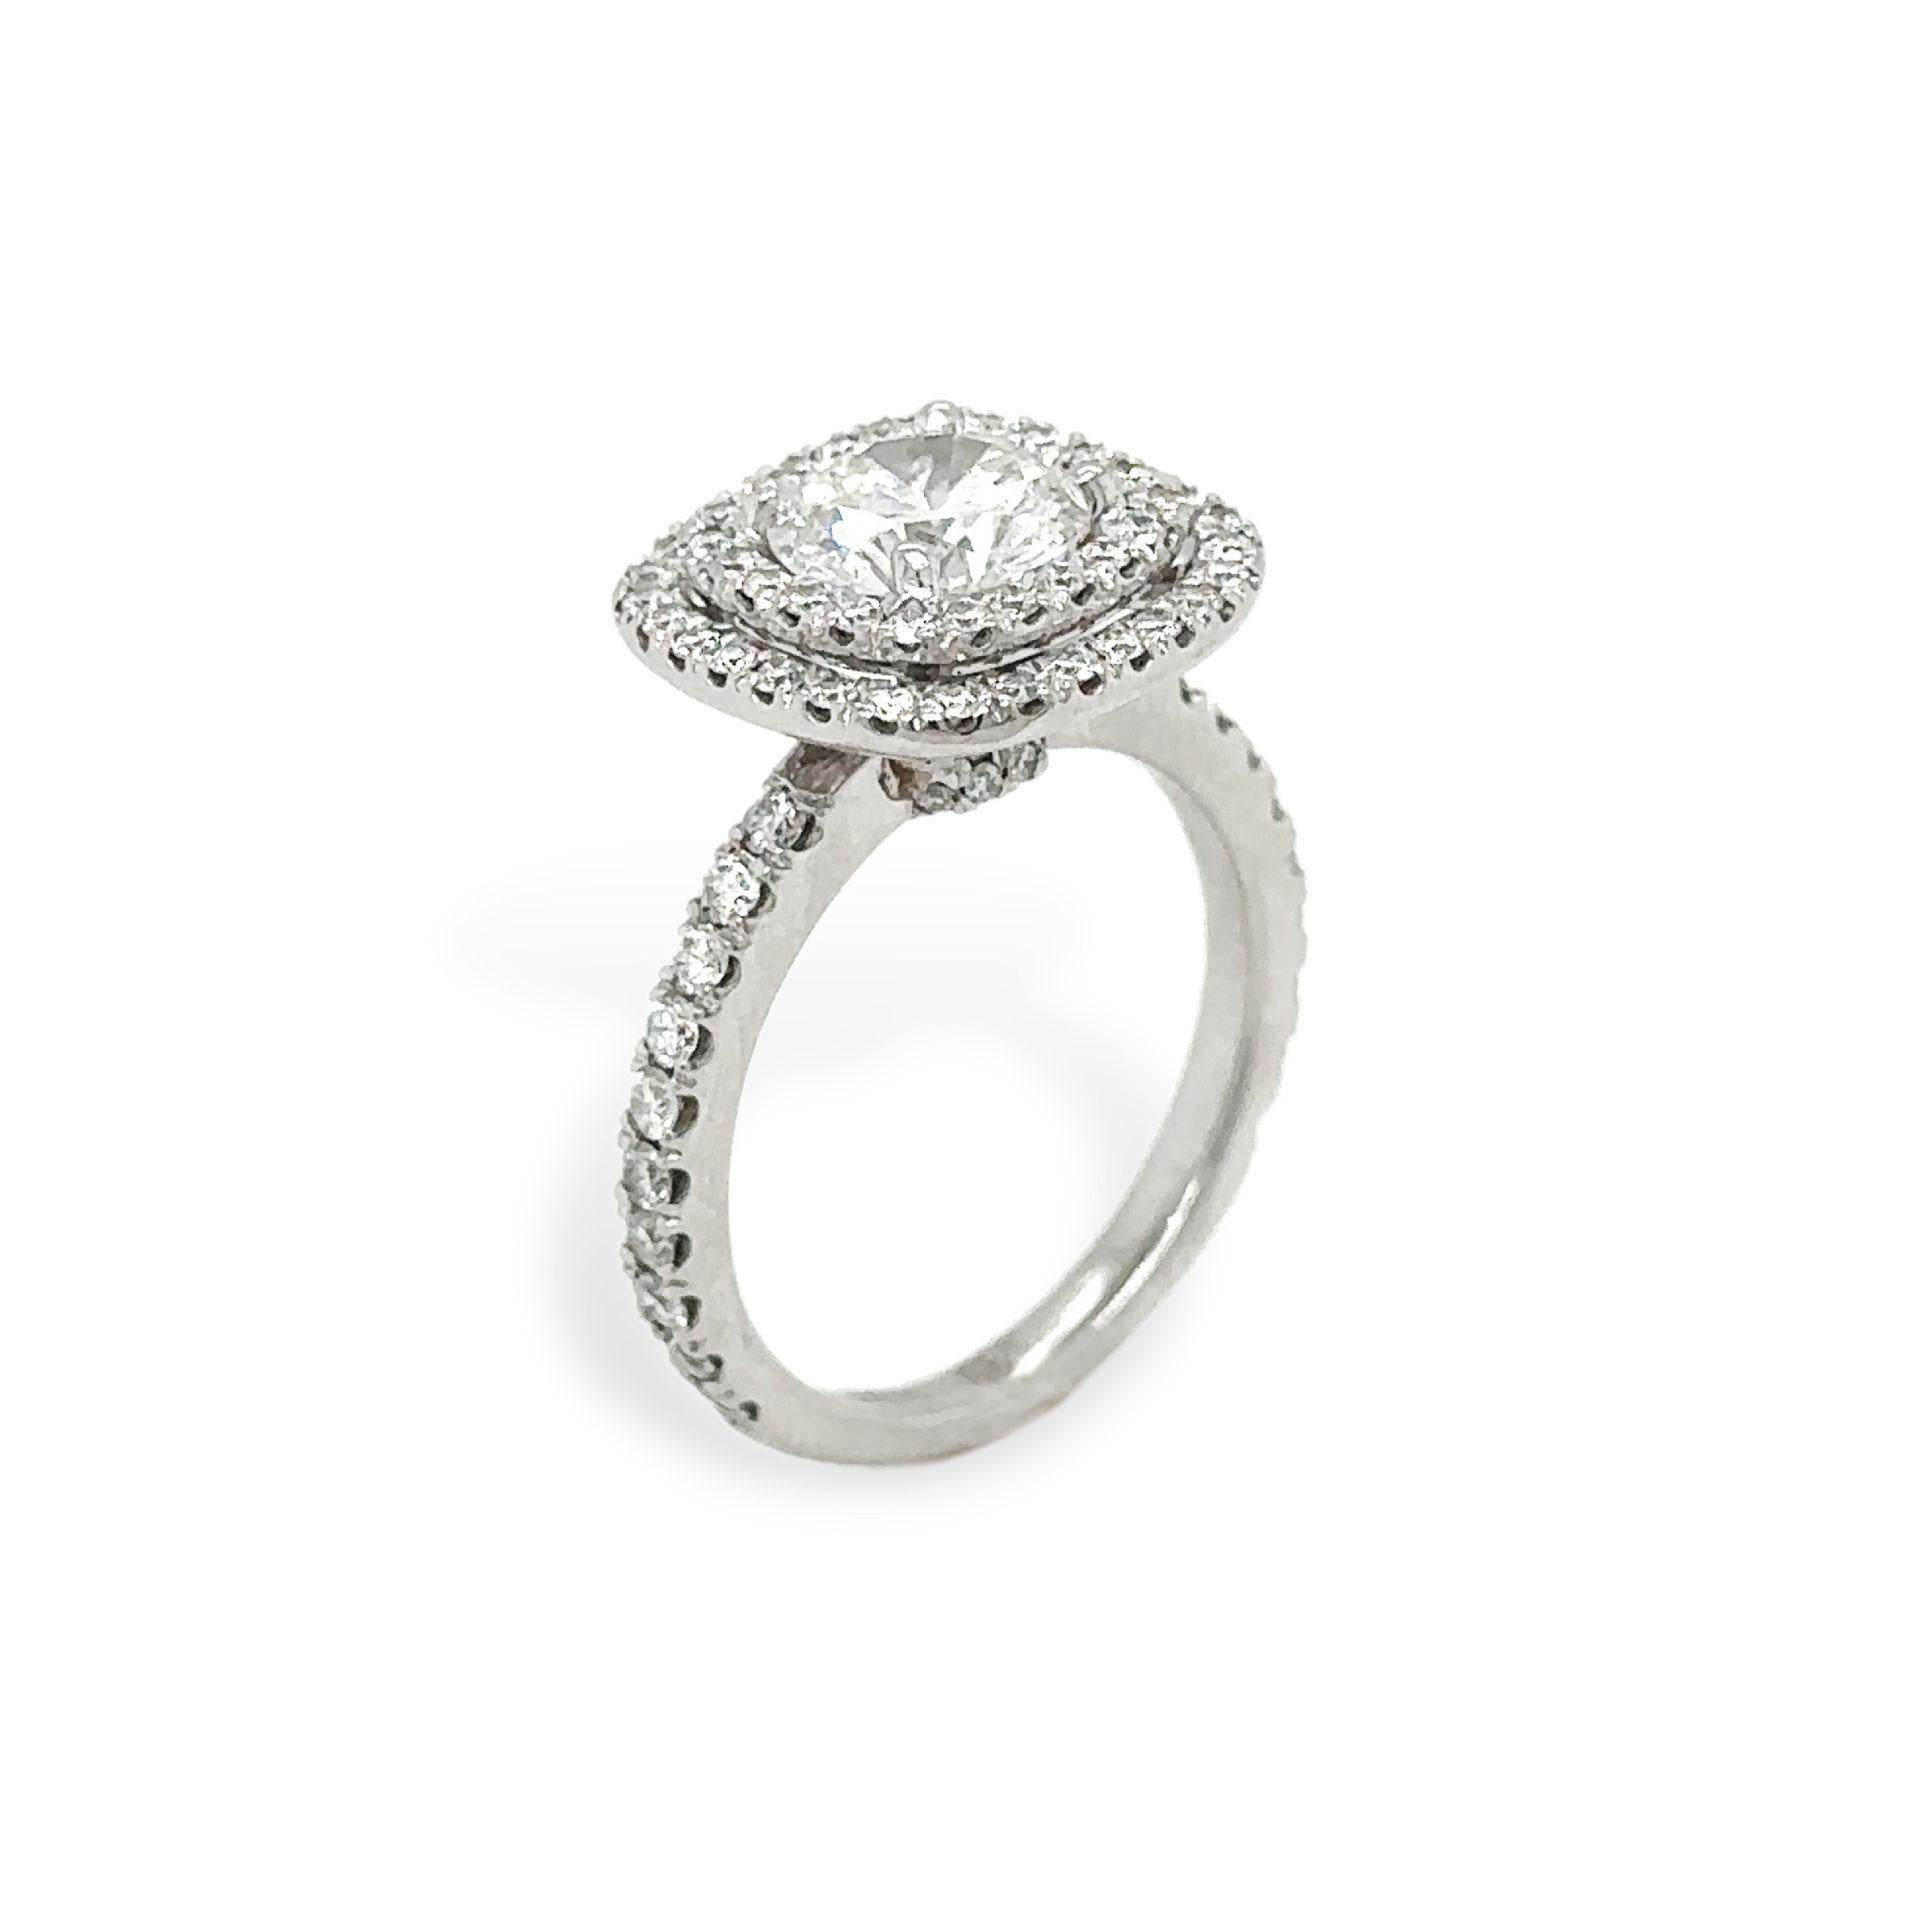 Diamond Round 1.25 Carat Engagement Ring Set in Platinum In New Condition For Sale In Beverly Hills, CA